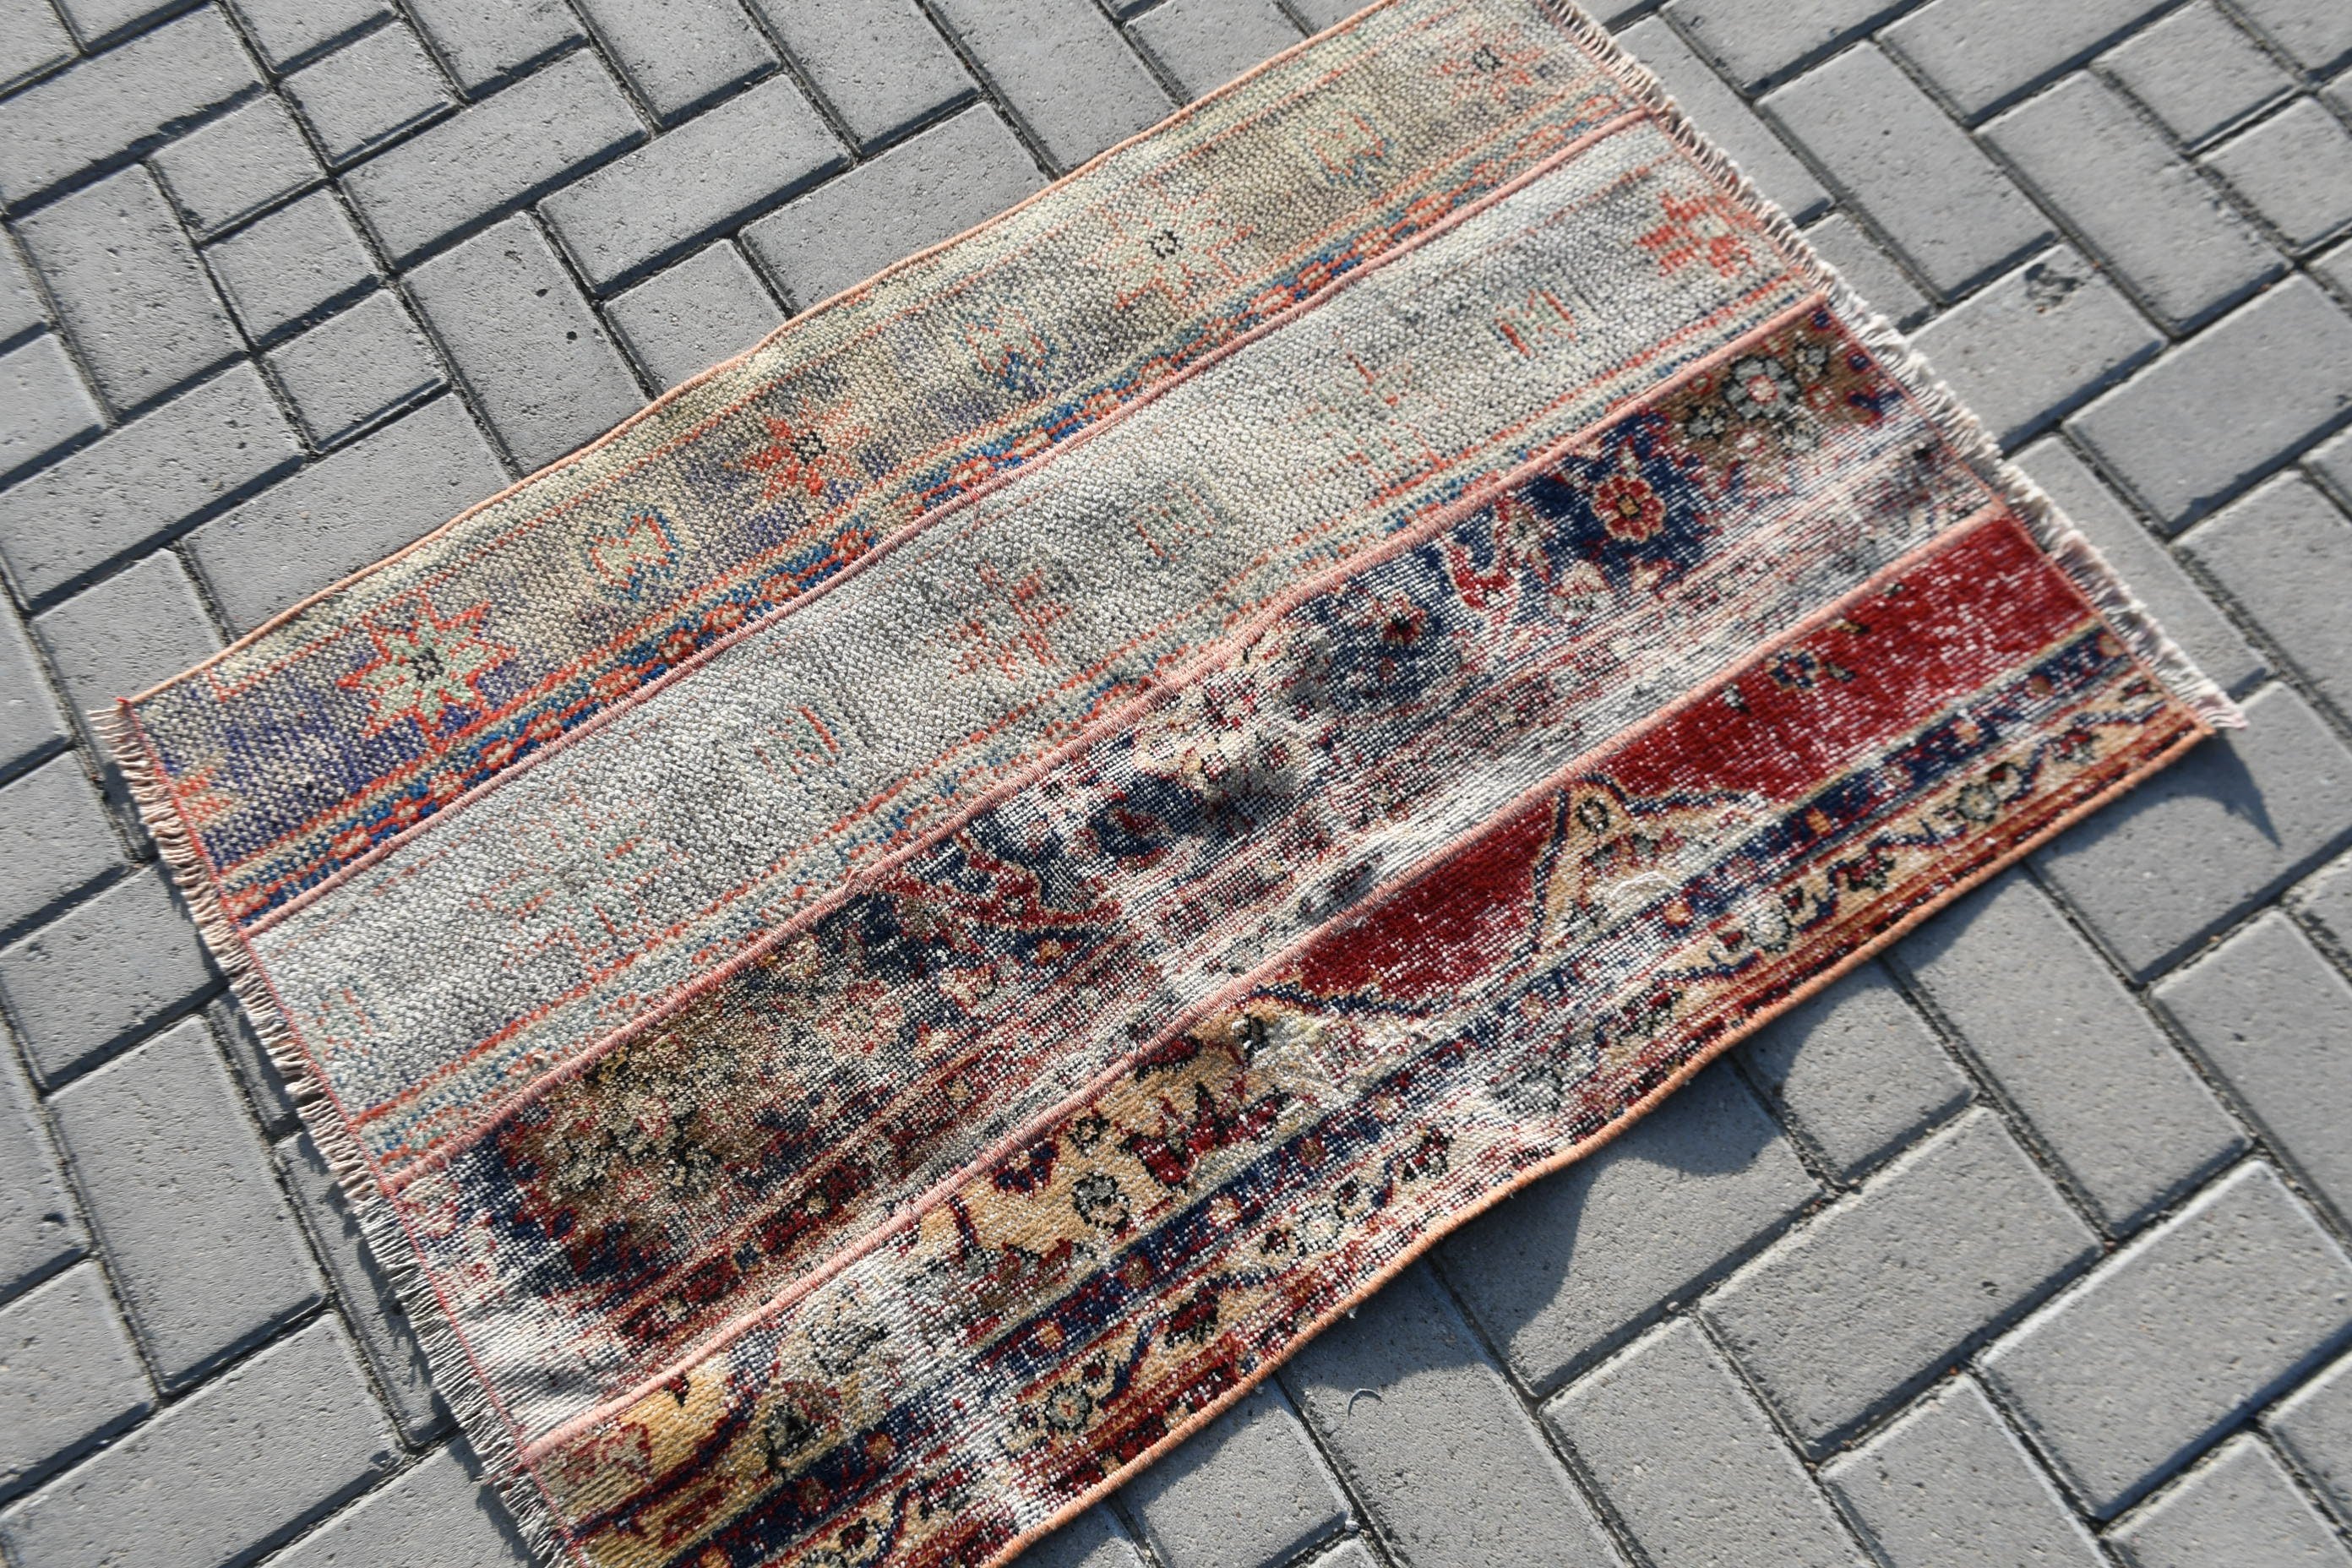 Kitchen Rug, Vintage Rug, Anatolian Rug, Rugs for Entry, 2.4x3.3 ft Small Rugs, Car Mat Rug, Turkish Rugs, Red Antique Rug, Oriental Rug